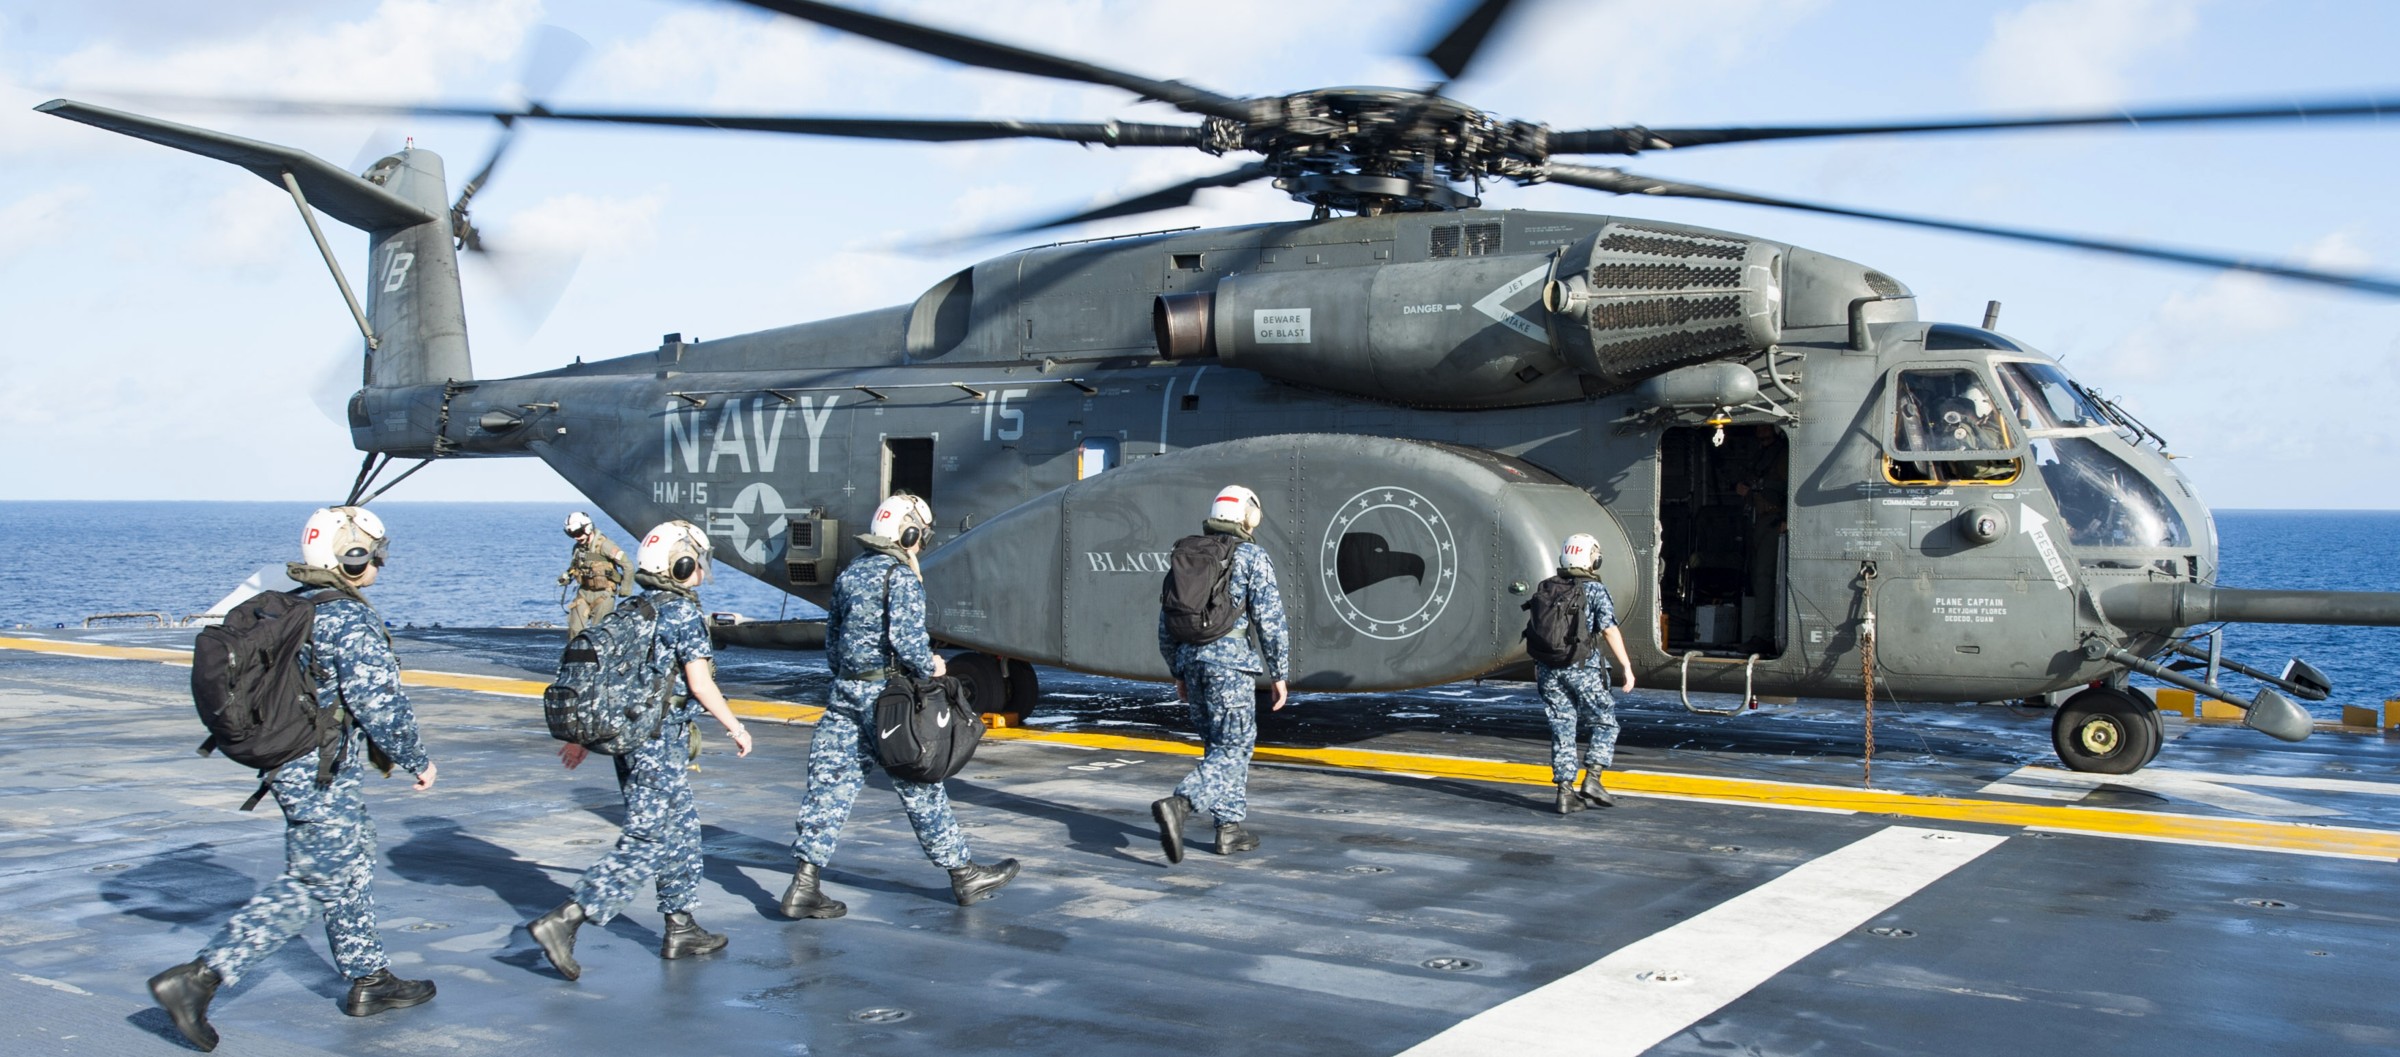 hm-15 blackhawks helicopter mine countermeasures squadron navy mh-53e sea dragon 05 uss wasp lhd-1